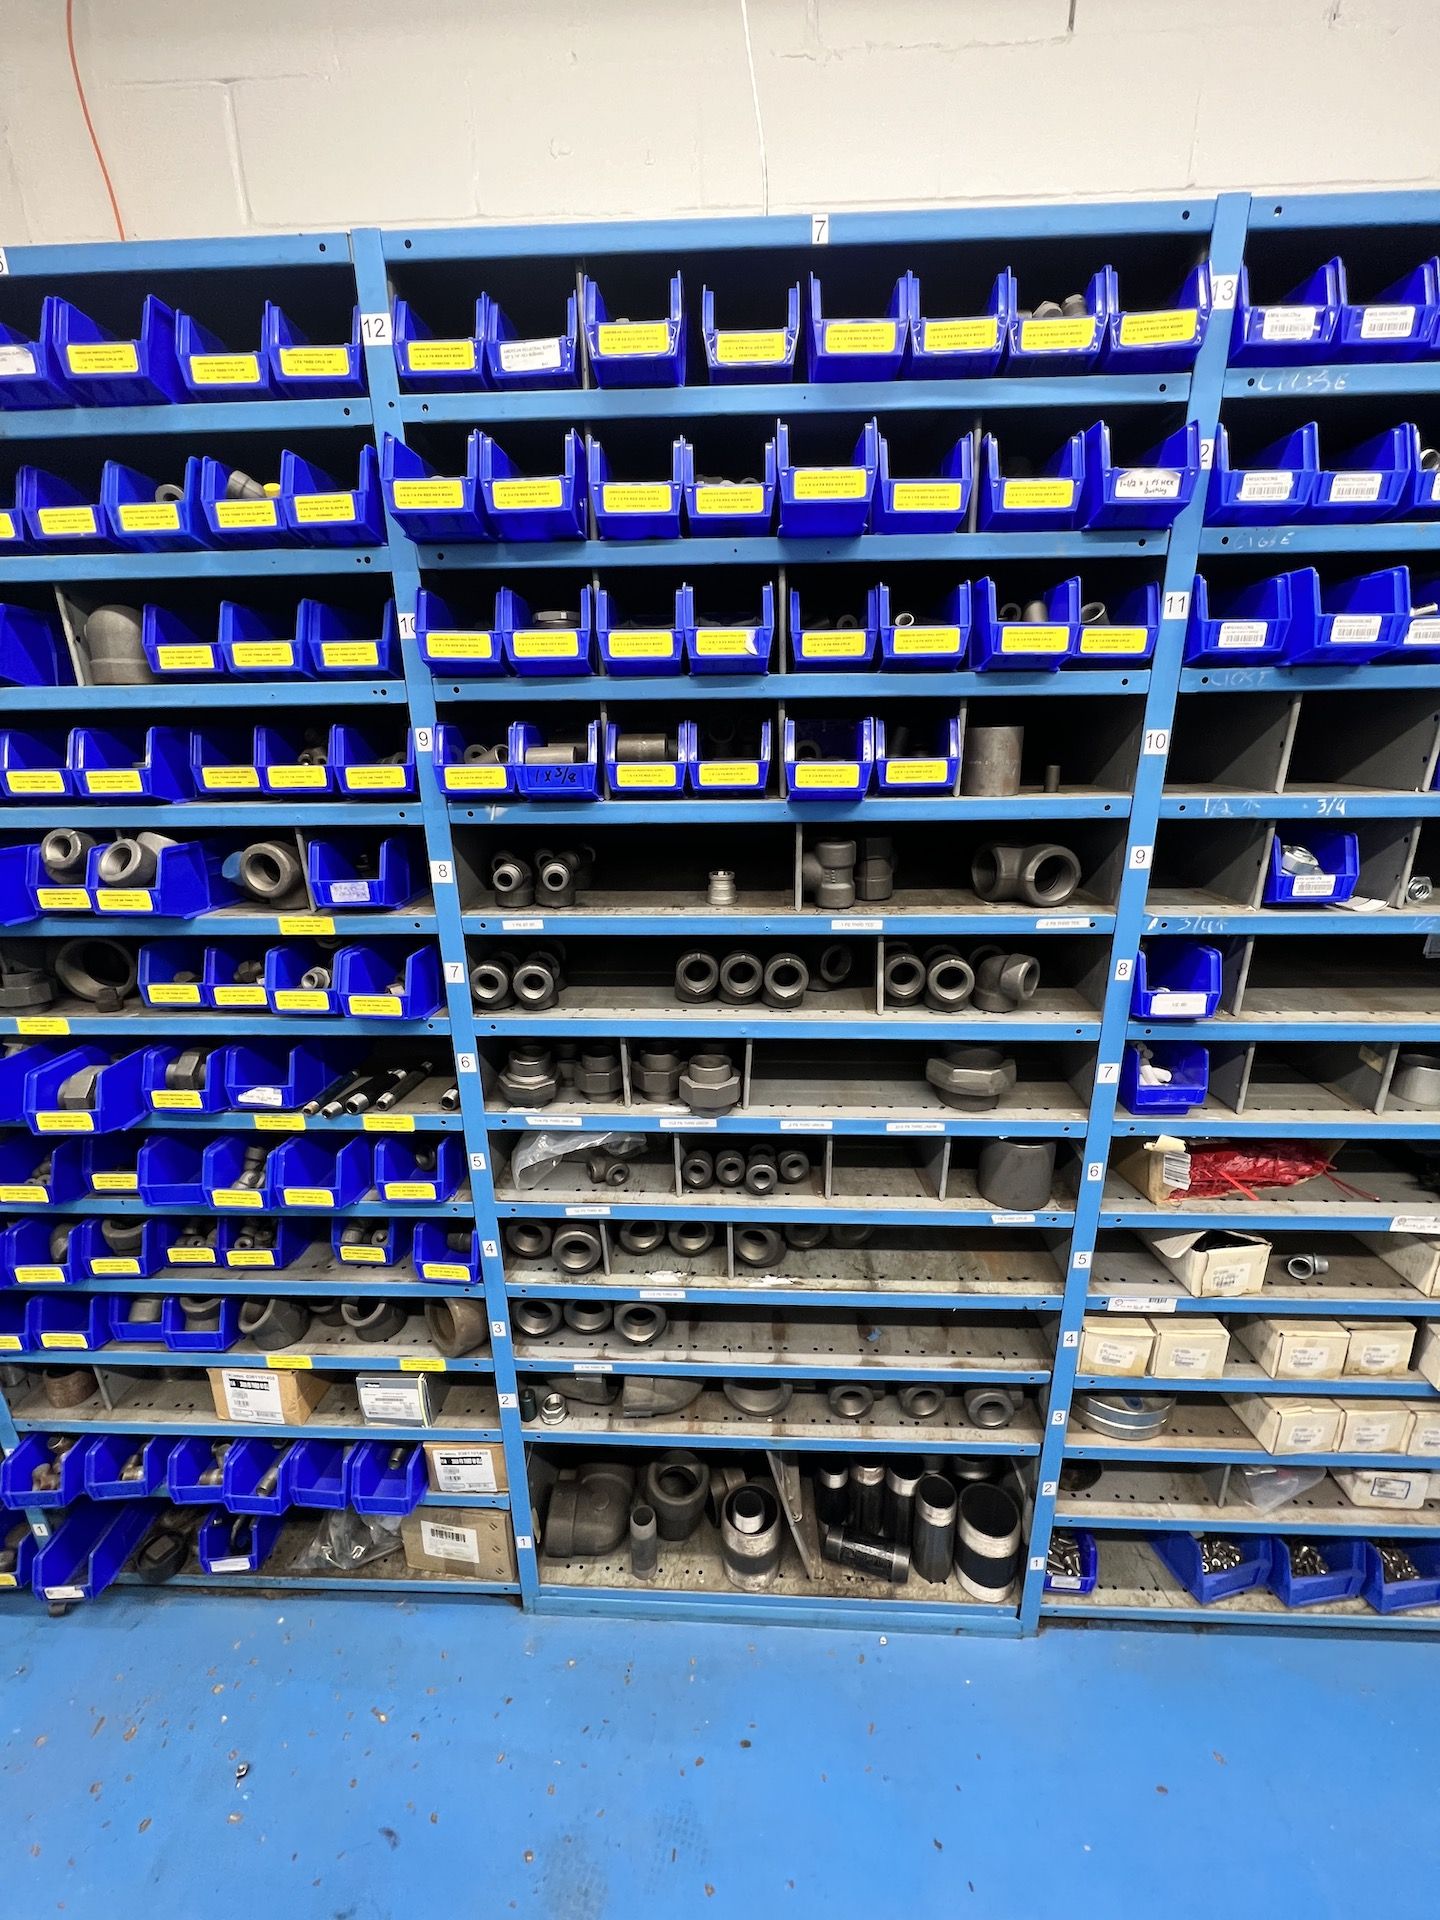 LOT OF ASSORTED PLUMBING FITTINGS, INCLUDES ELBOWS, COUPLINGS, UNIONS, ADAPTERS, AND MUCH MORE - Image 15 of 18